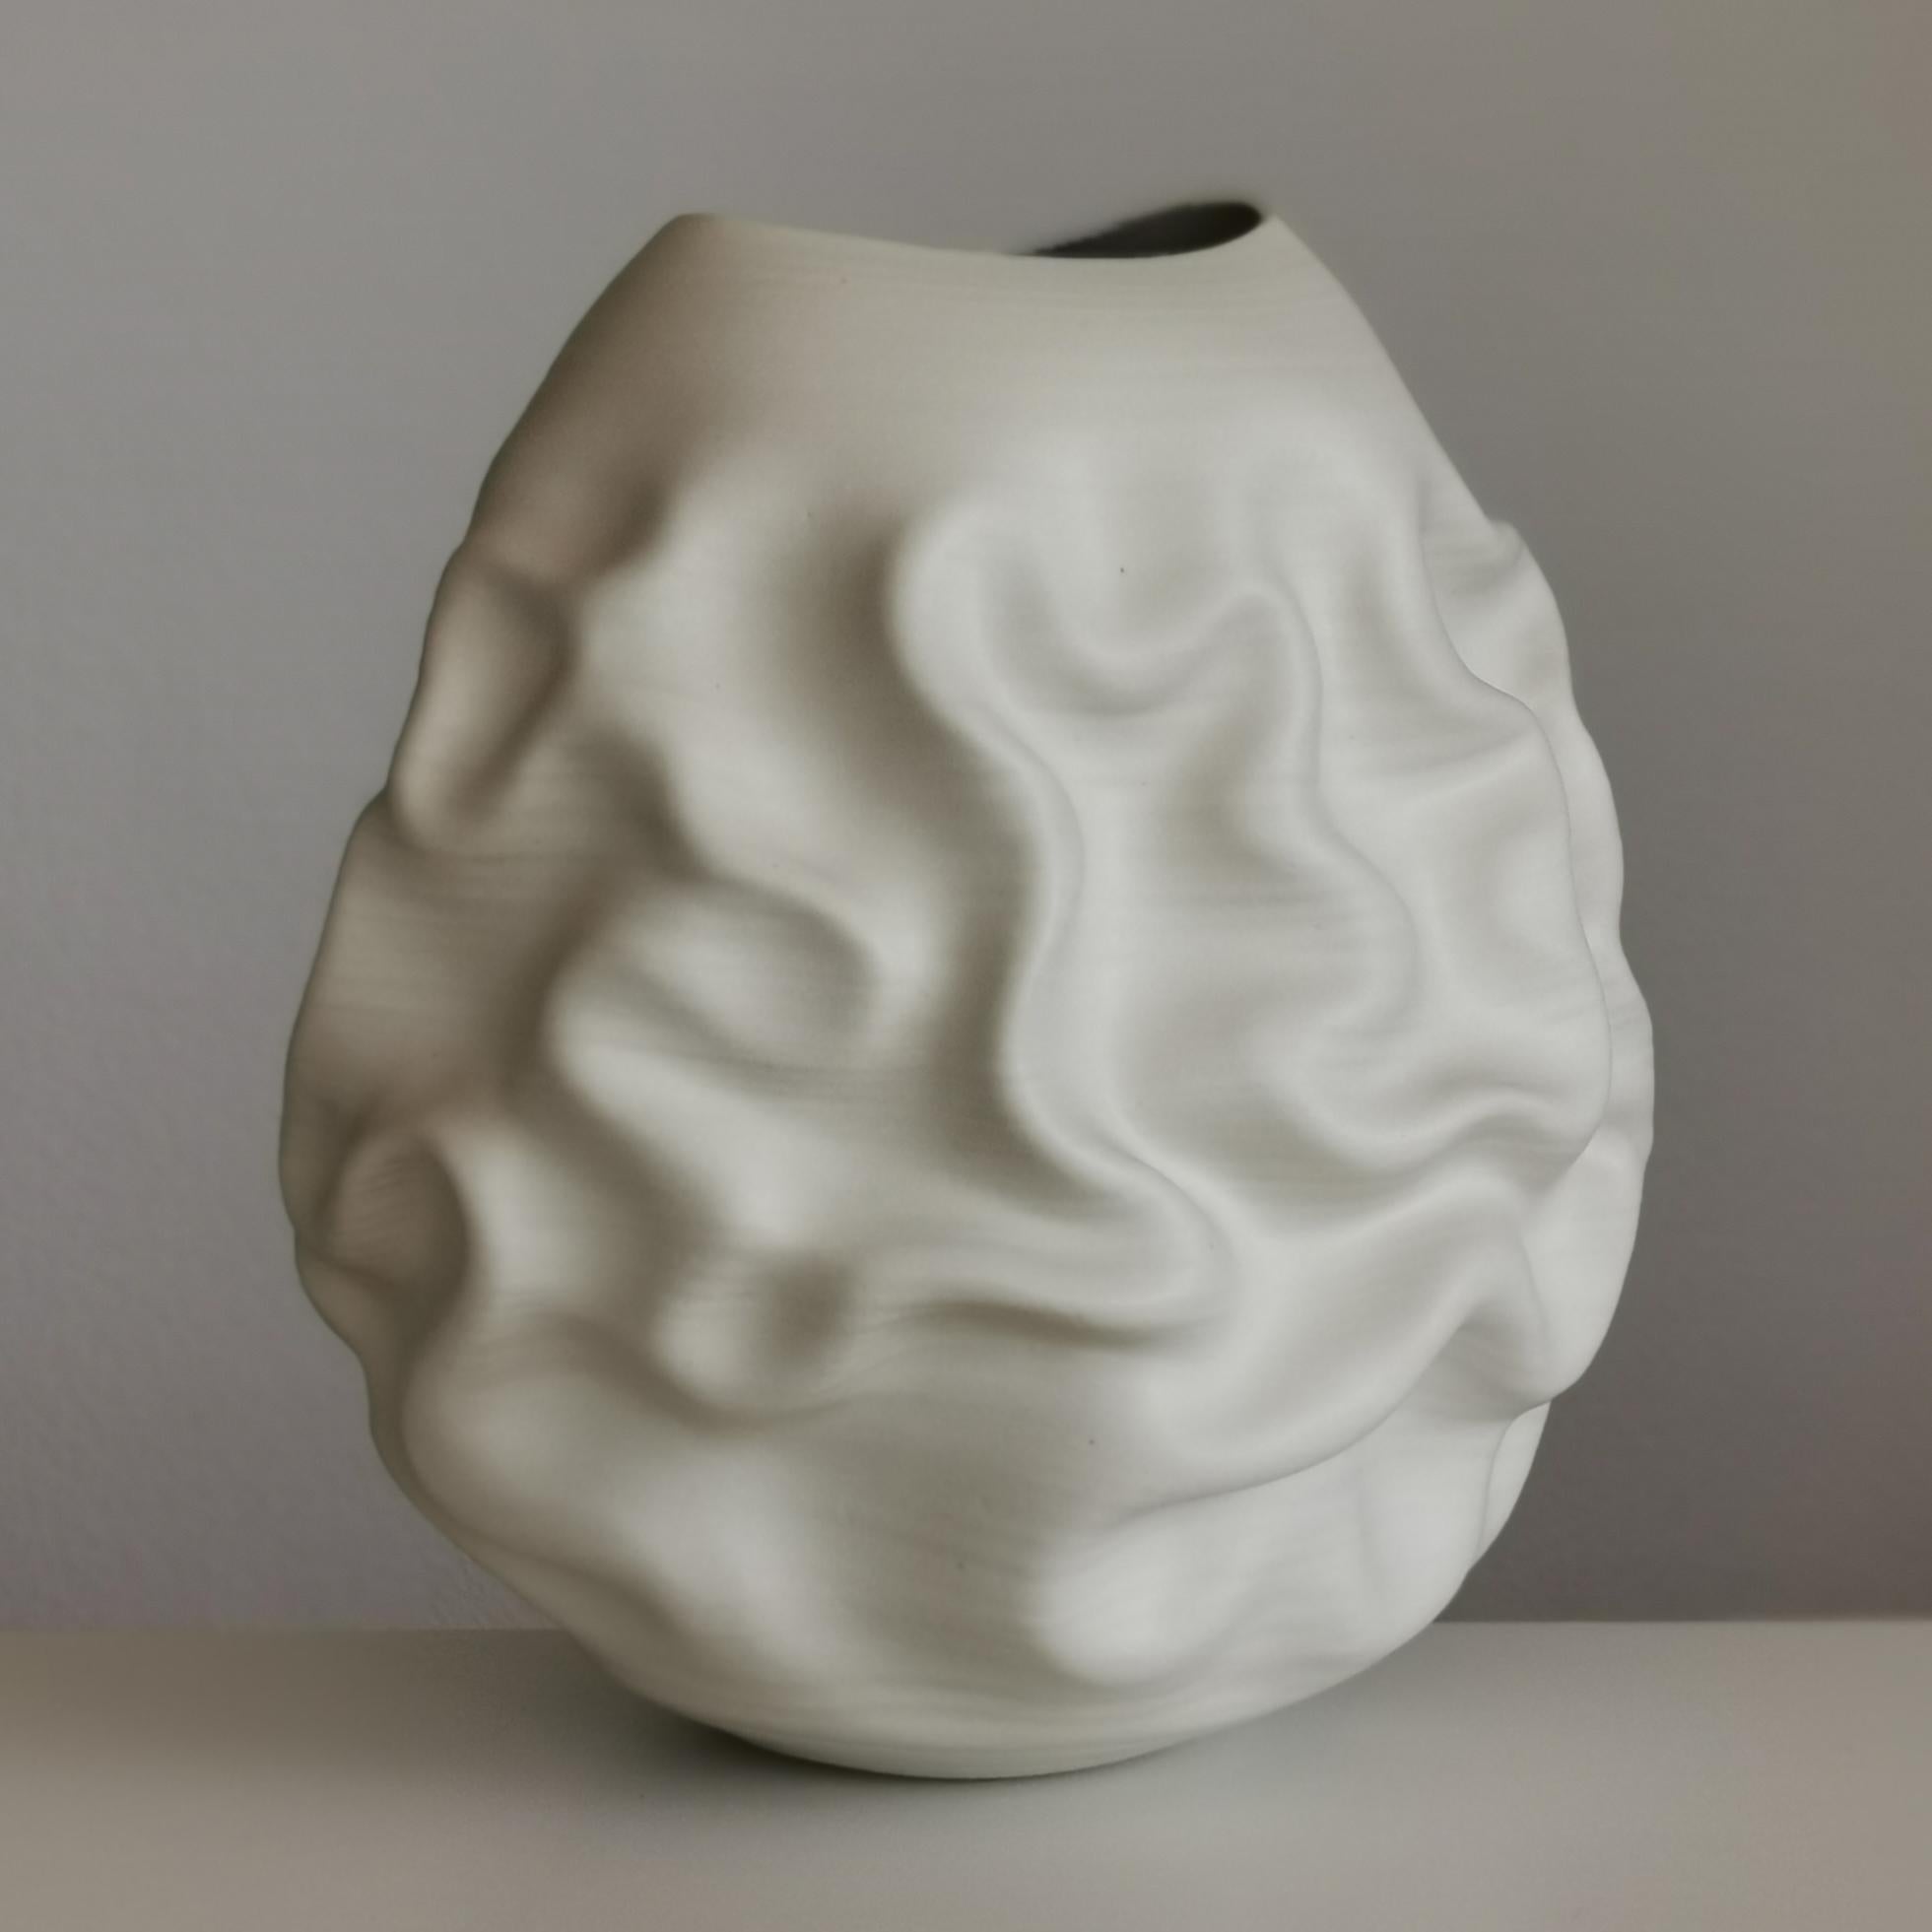 Hand-Crafted Large White Dehydrated Form No 33, Ceramic Vessel by Nicholas Arroyave-Portela